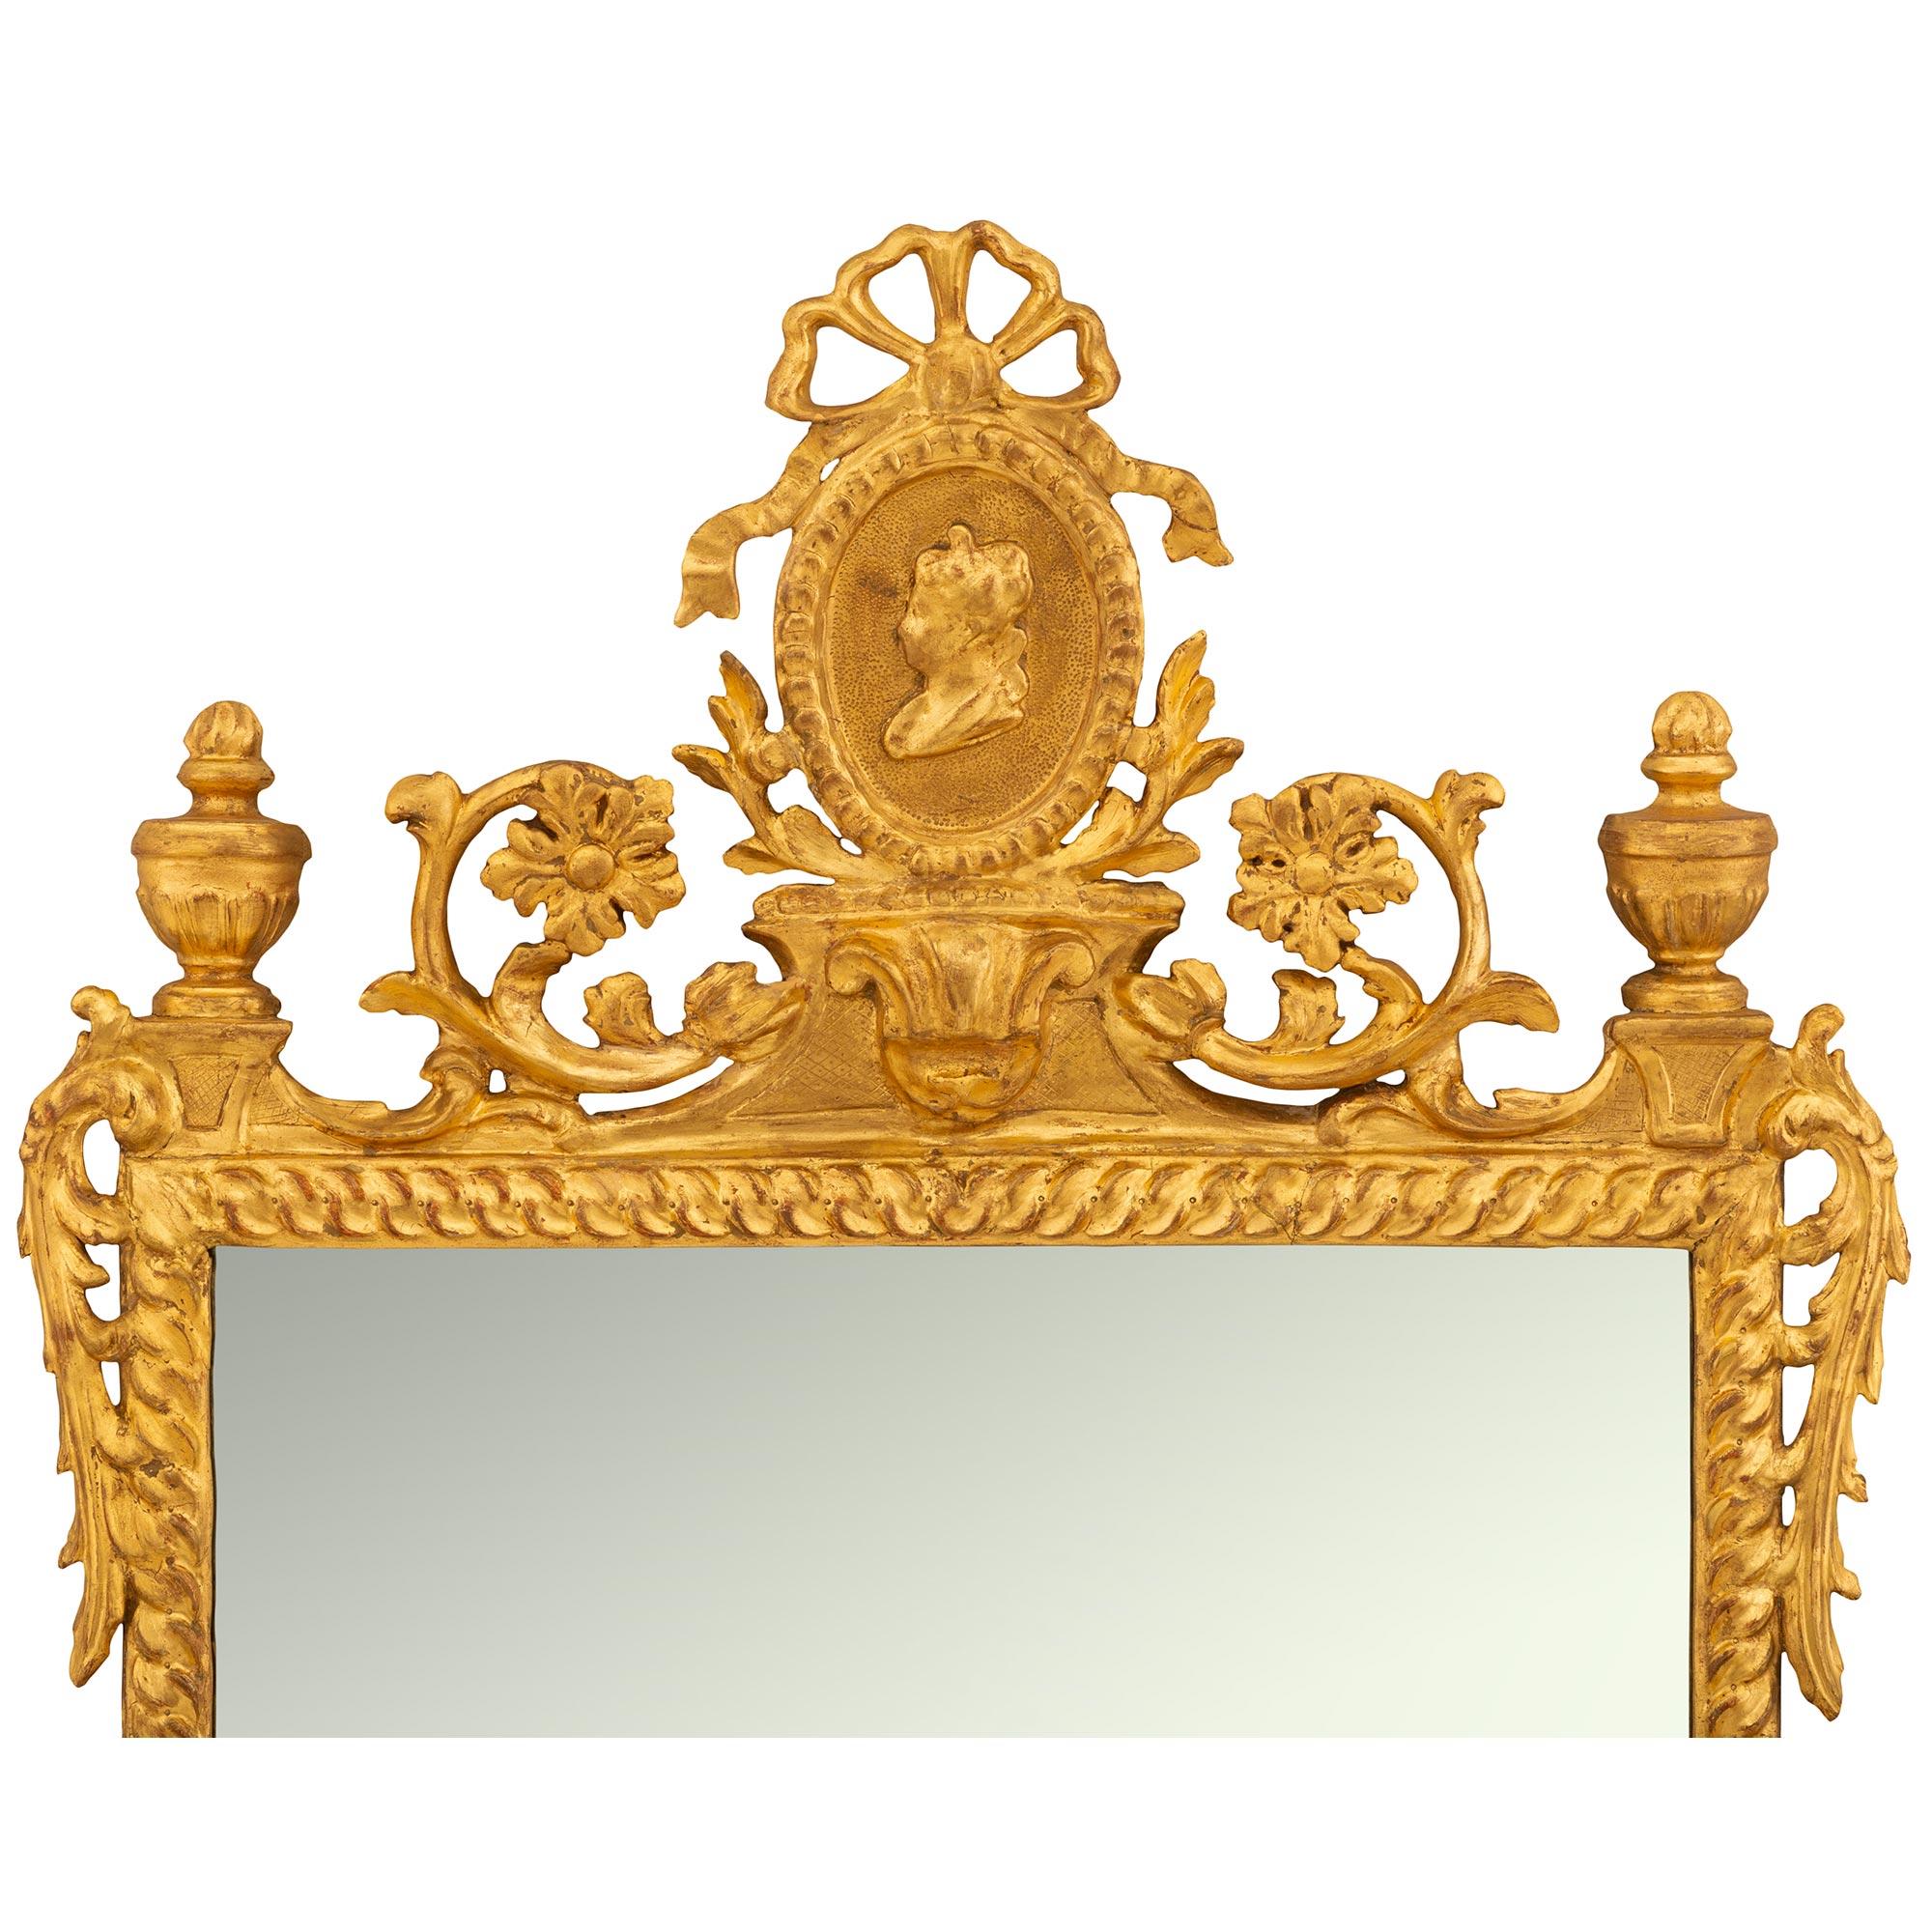 Italian 18th Century Louis XVI Period Giltwood Mirror In Good Condition For Sale In West Palm Beach, FL